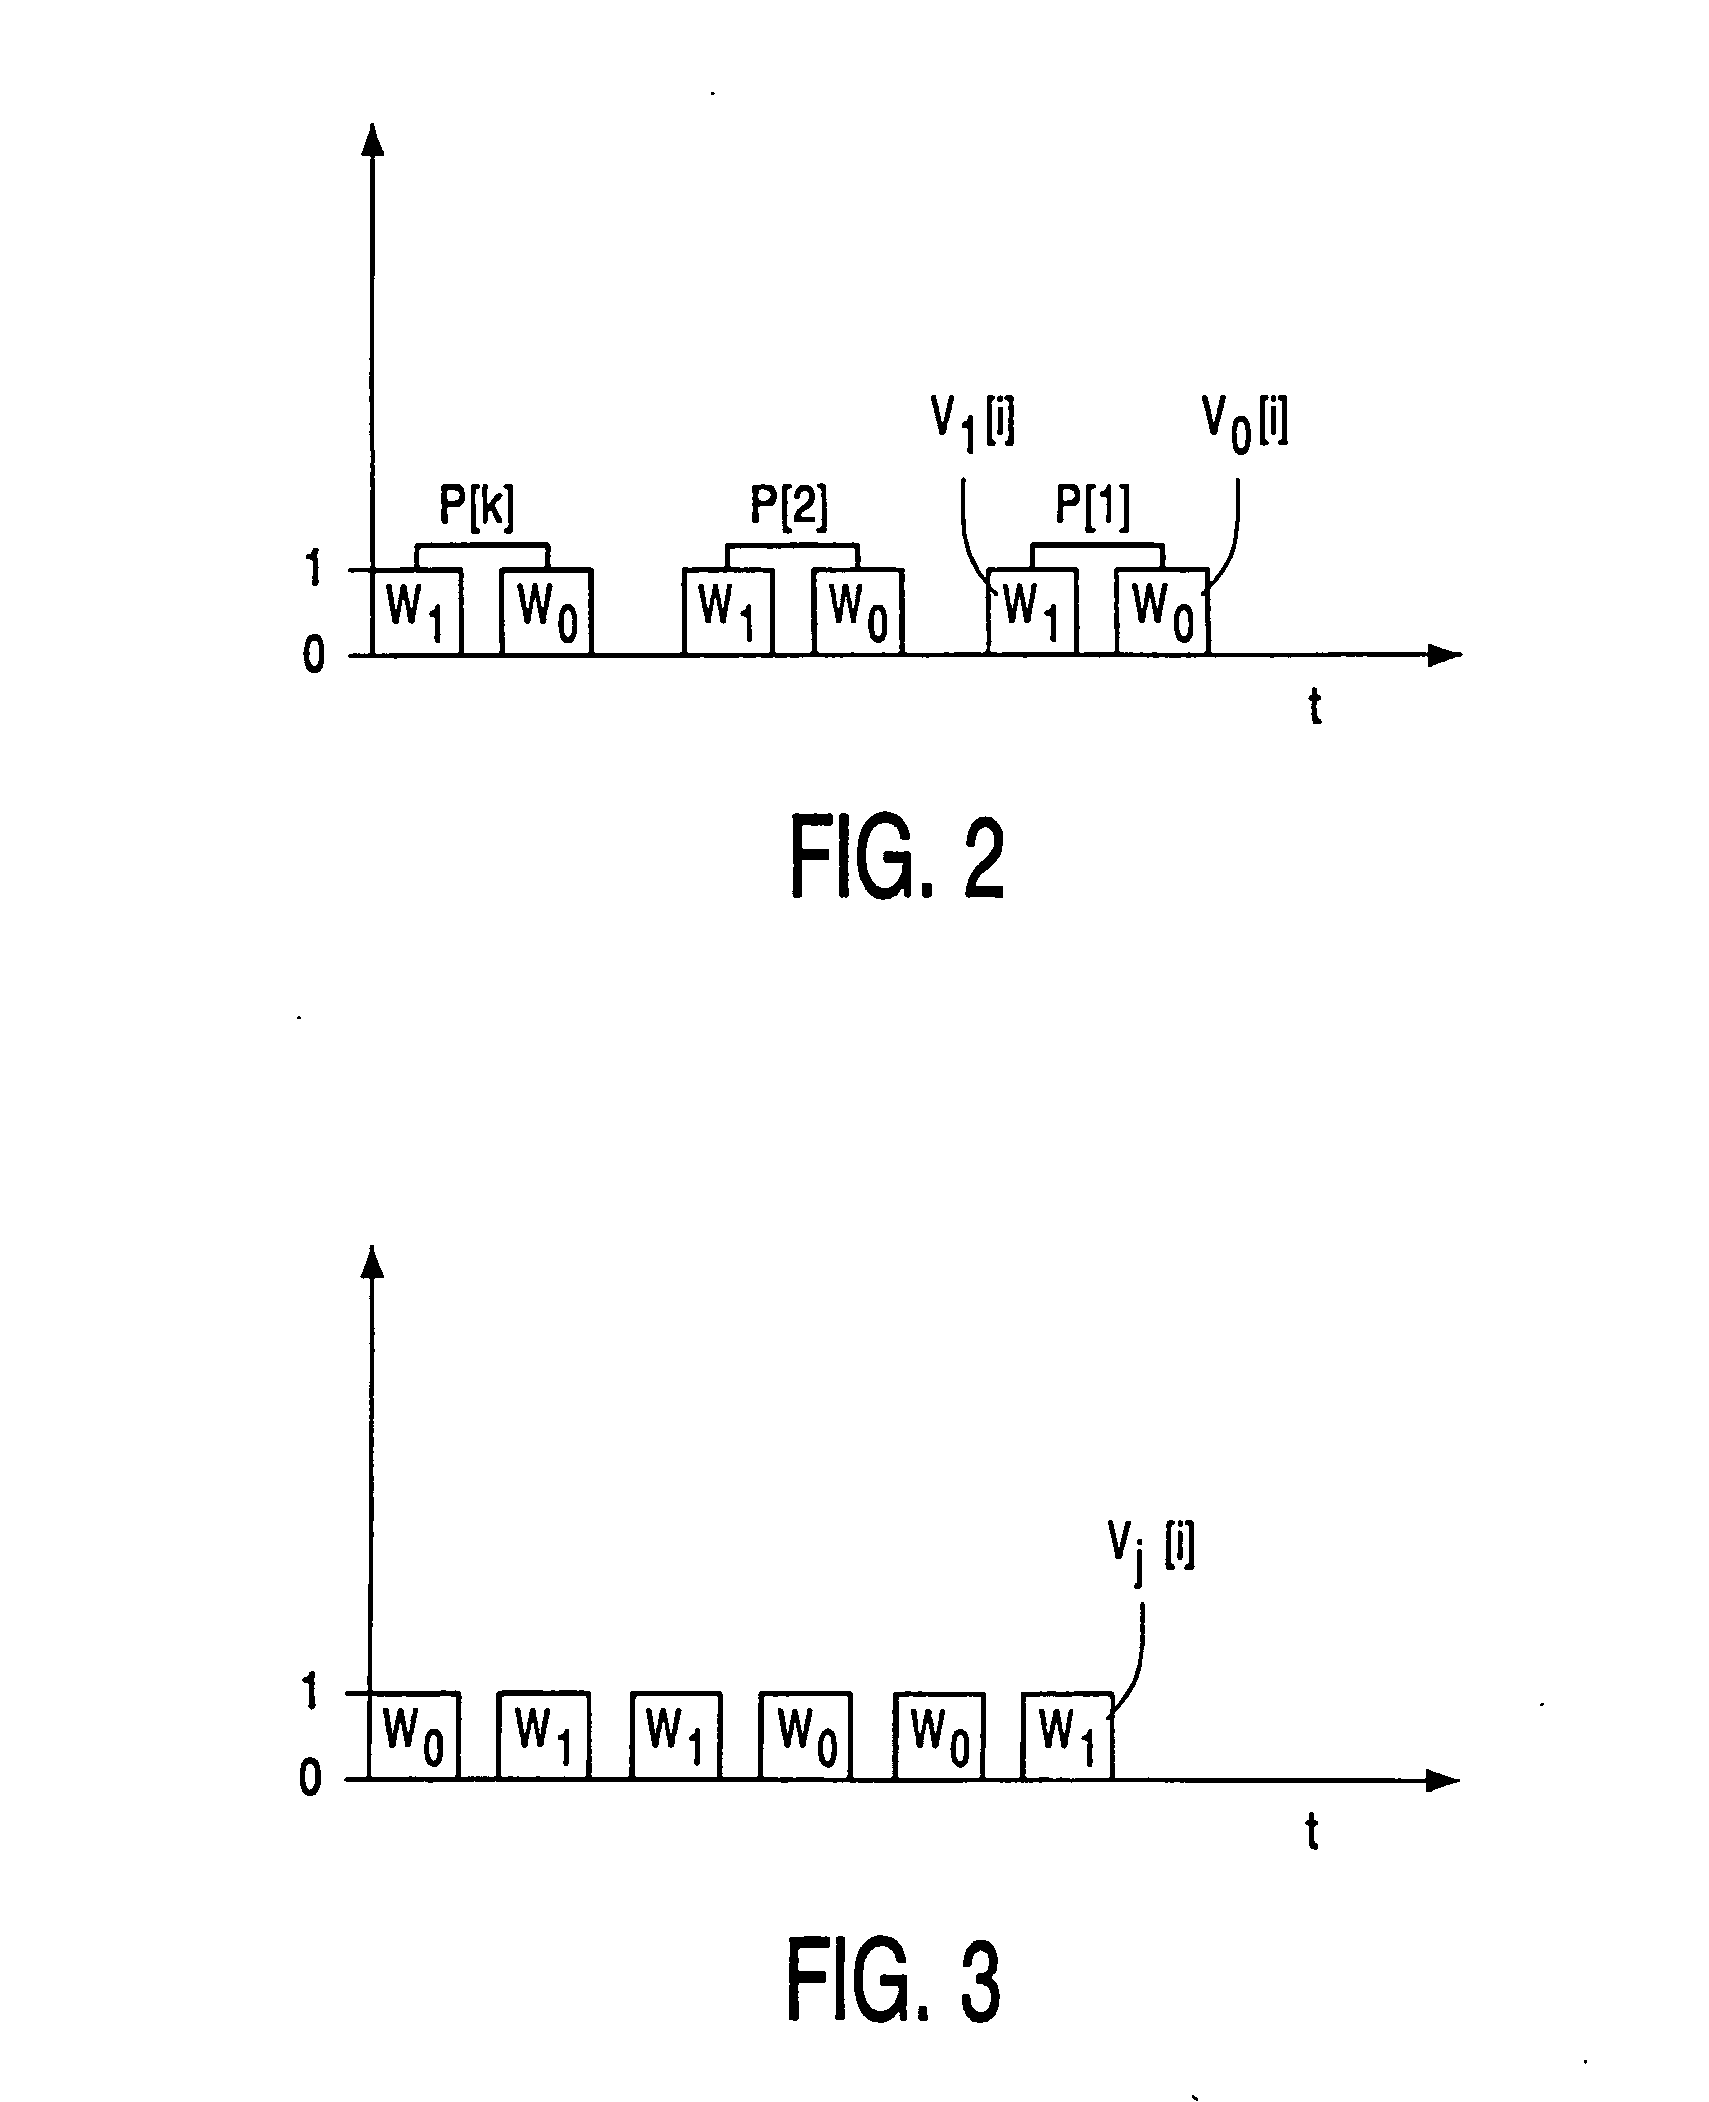 Generation of a watermark being unique to a receiver of a multicast transmission of multimedia